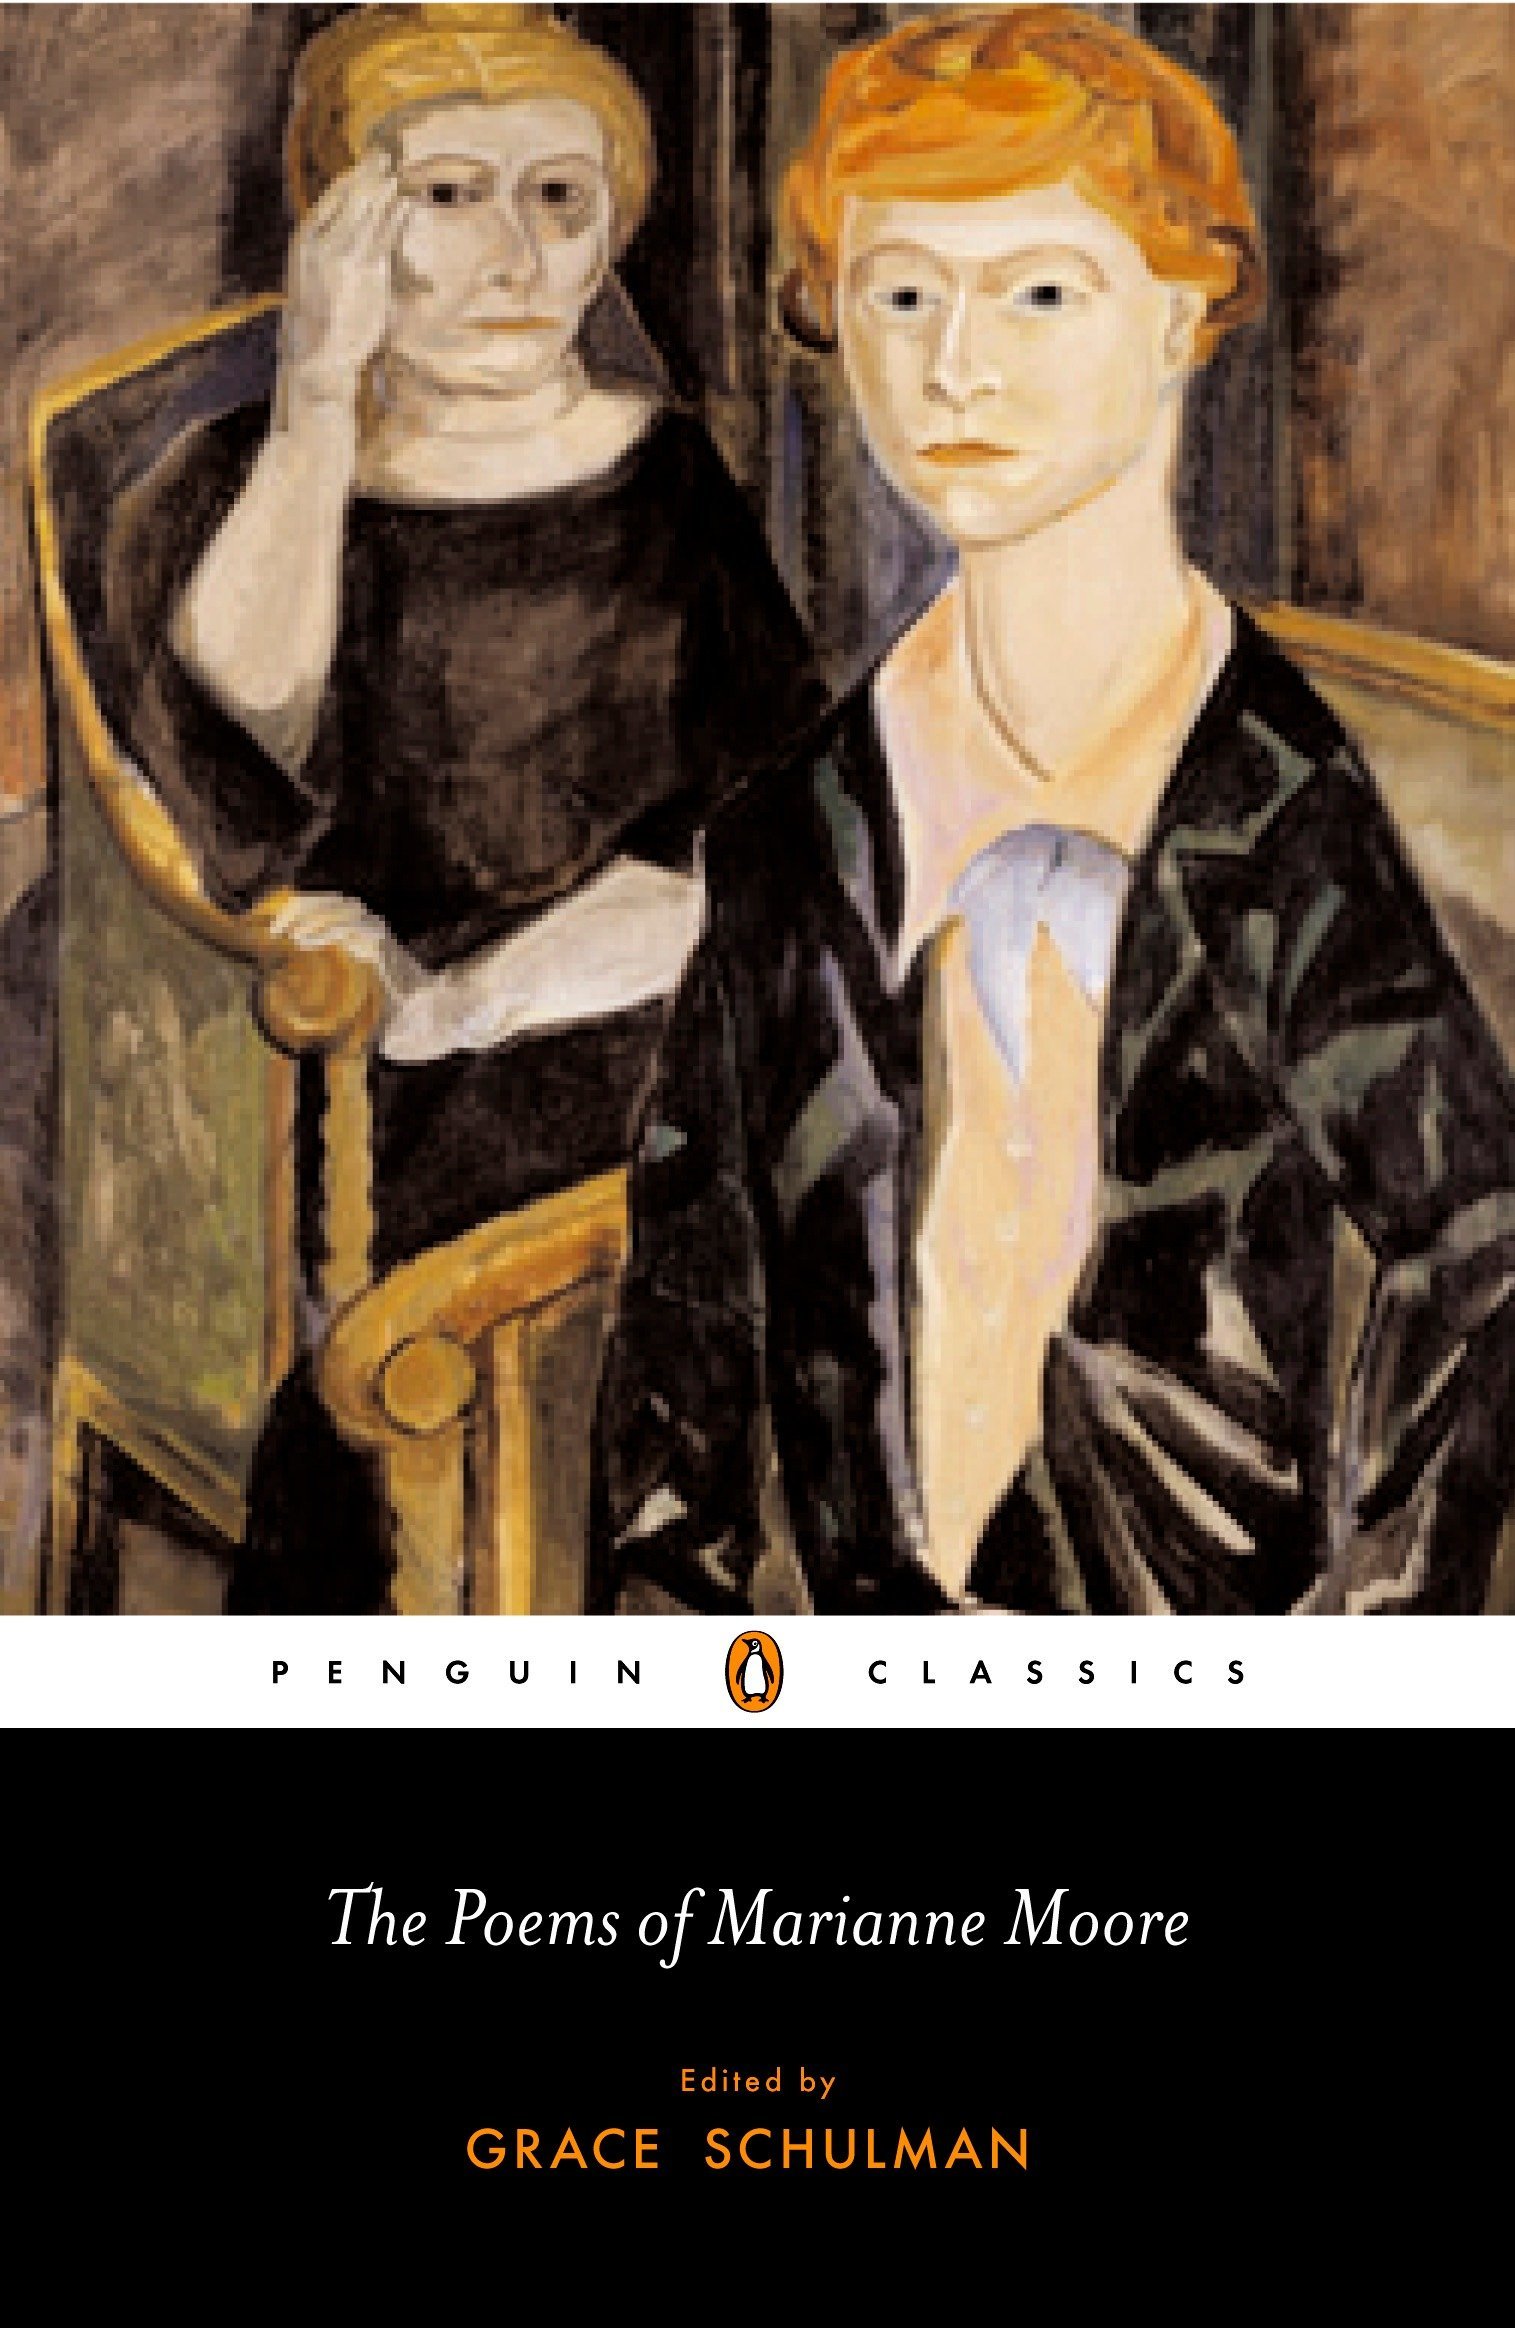 Marianne Moore: The poems of Marianne Moore (2005, Penguin Classics)